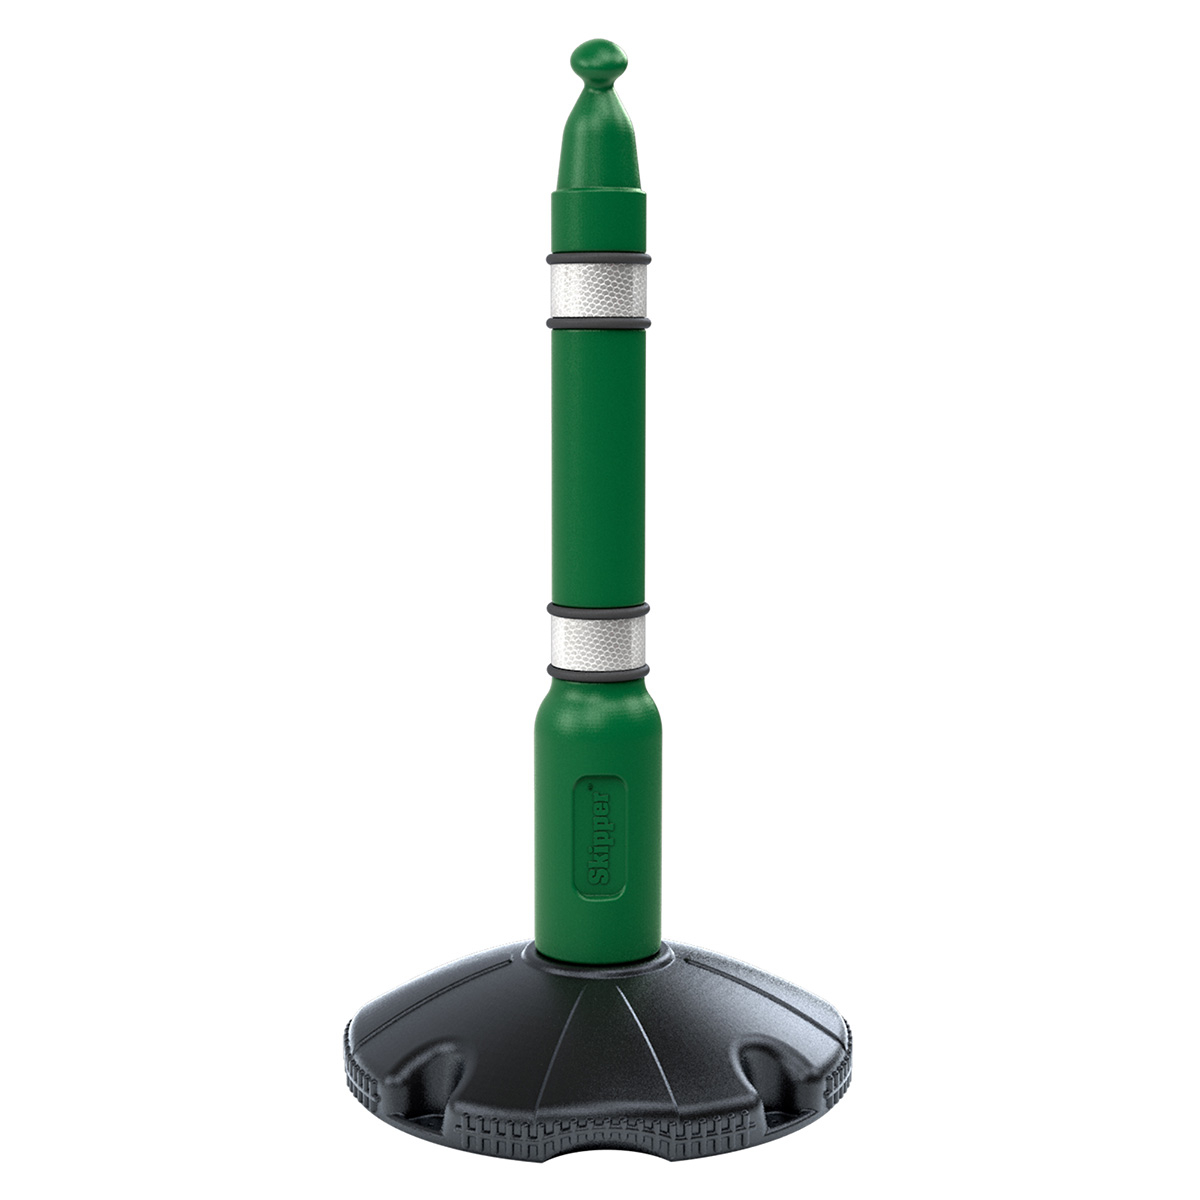 Skipper™ Retractable Barrier Post And Base System in Green - Suitable For Use Indoors And Outdoors